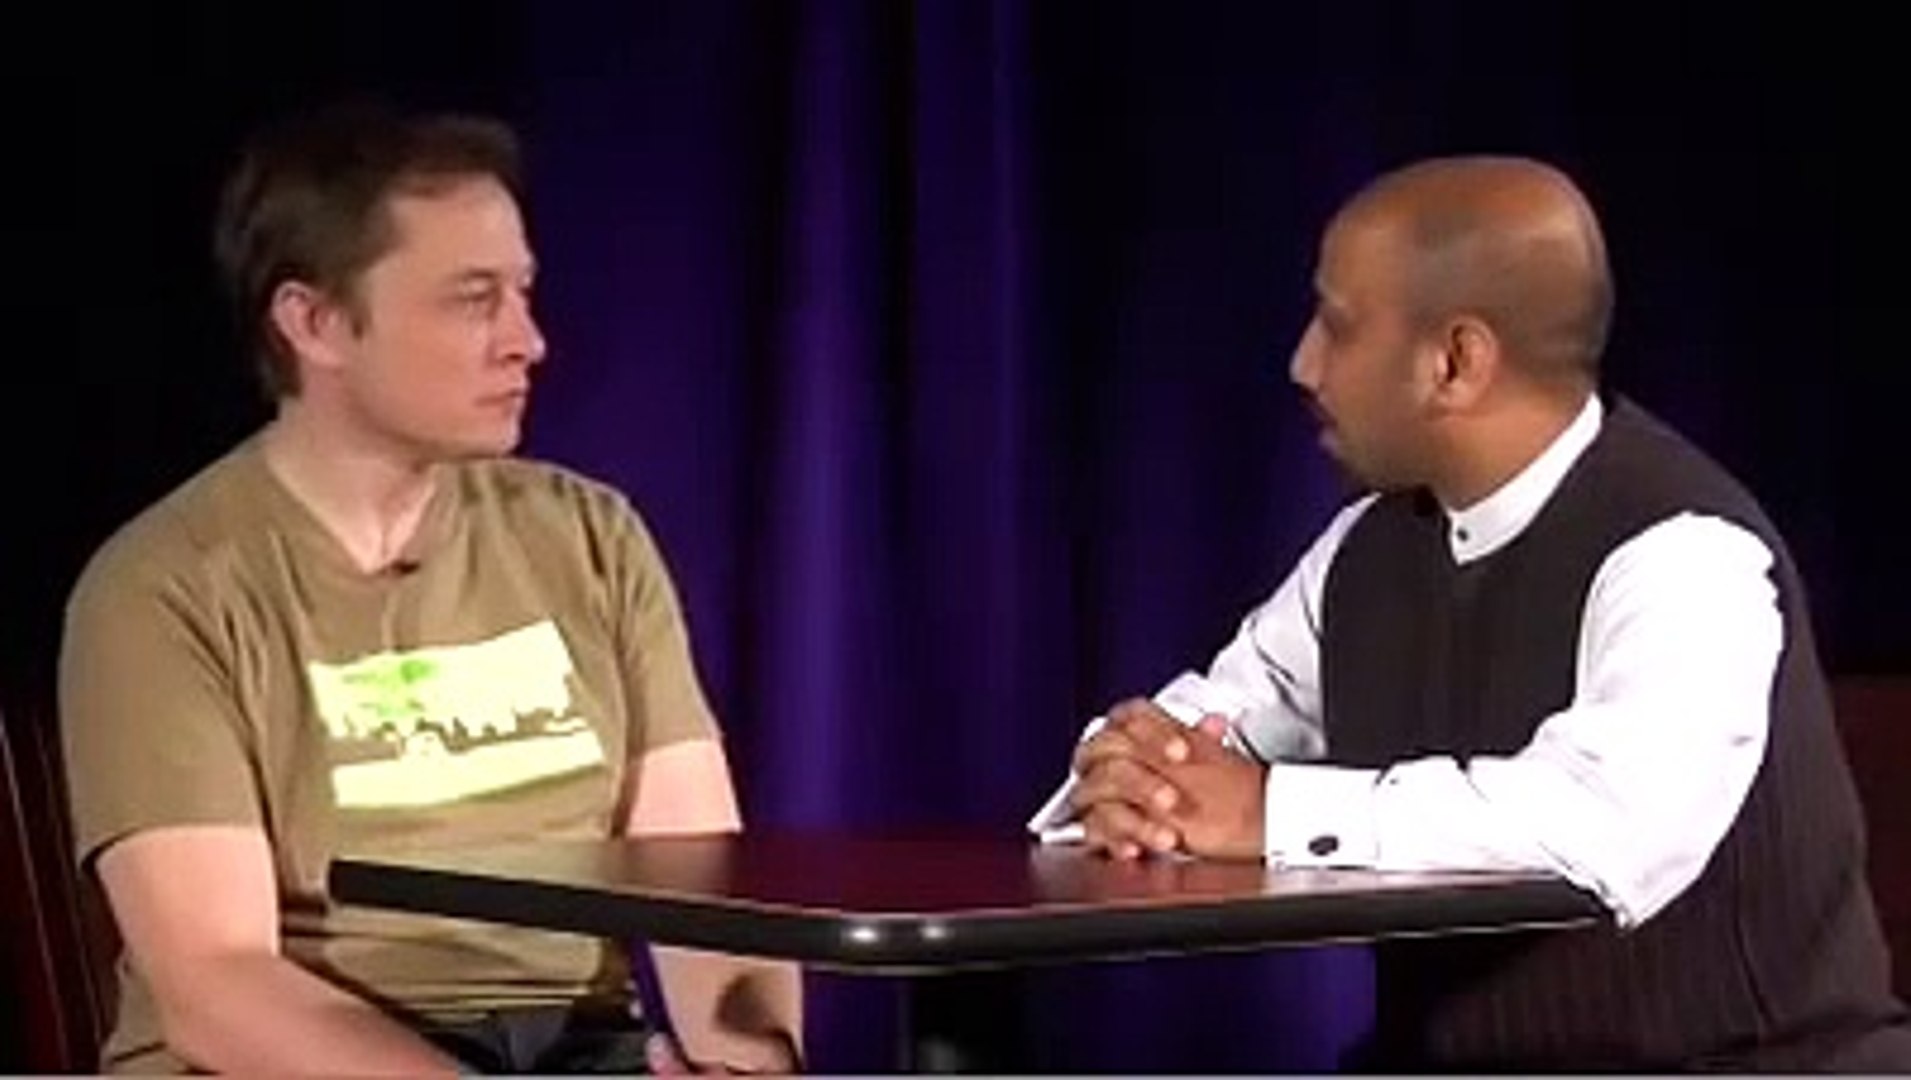 TiEcon 2008: Interview with Elon Musk